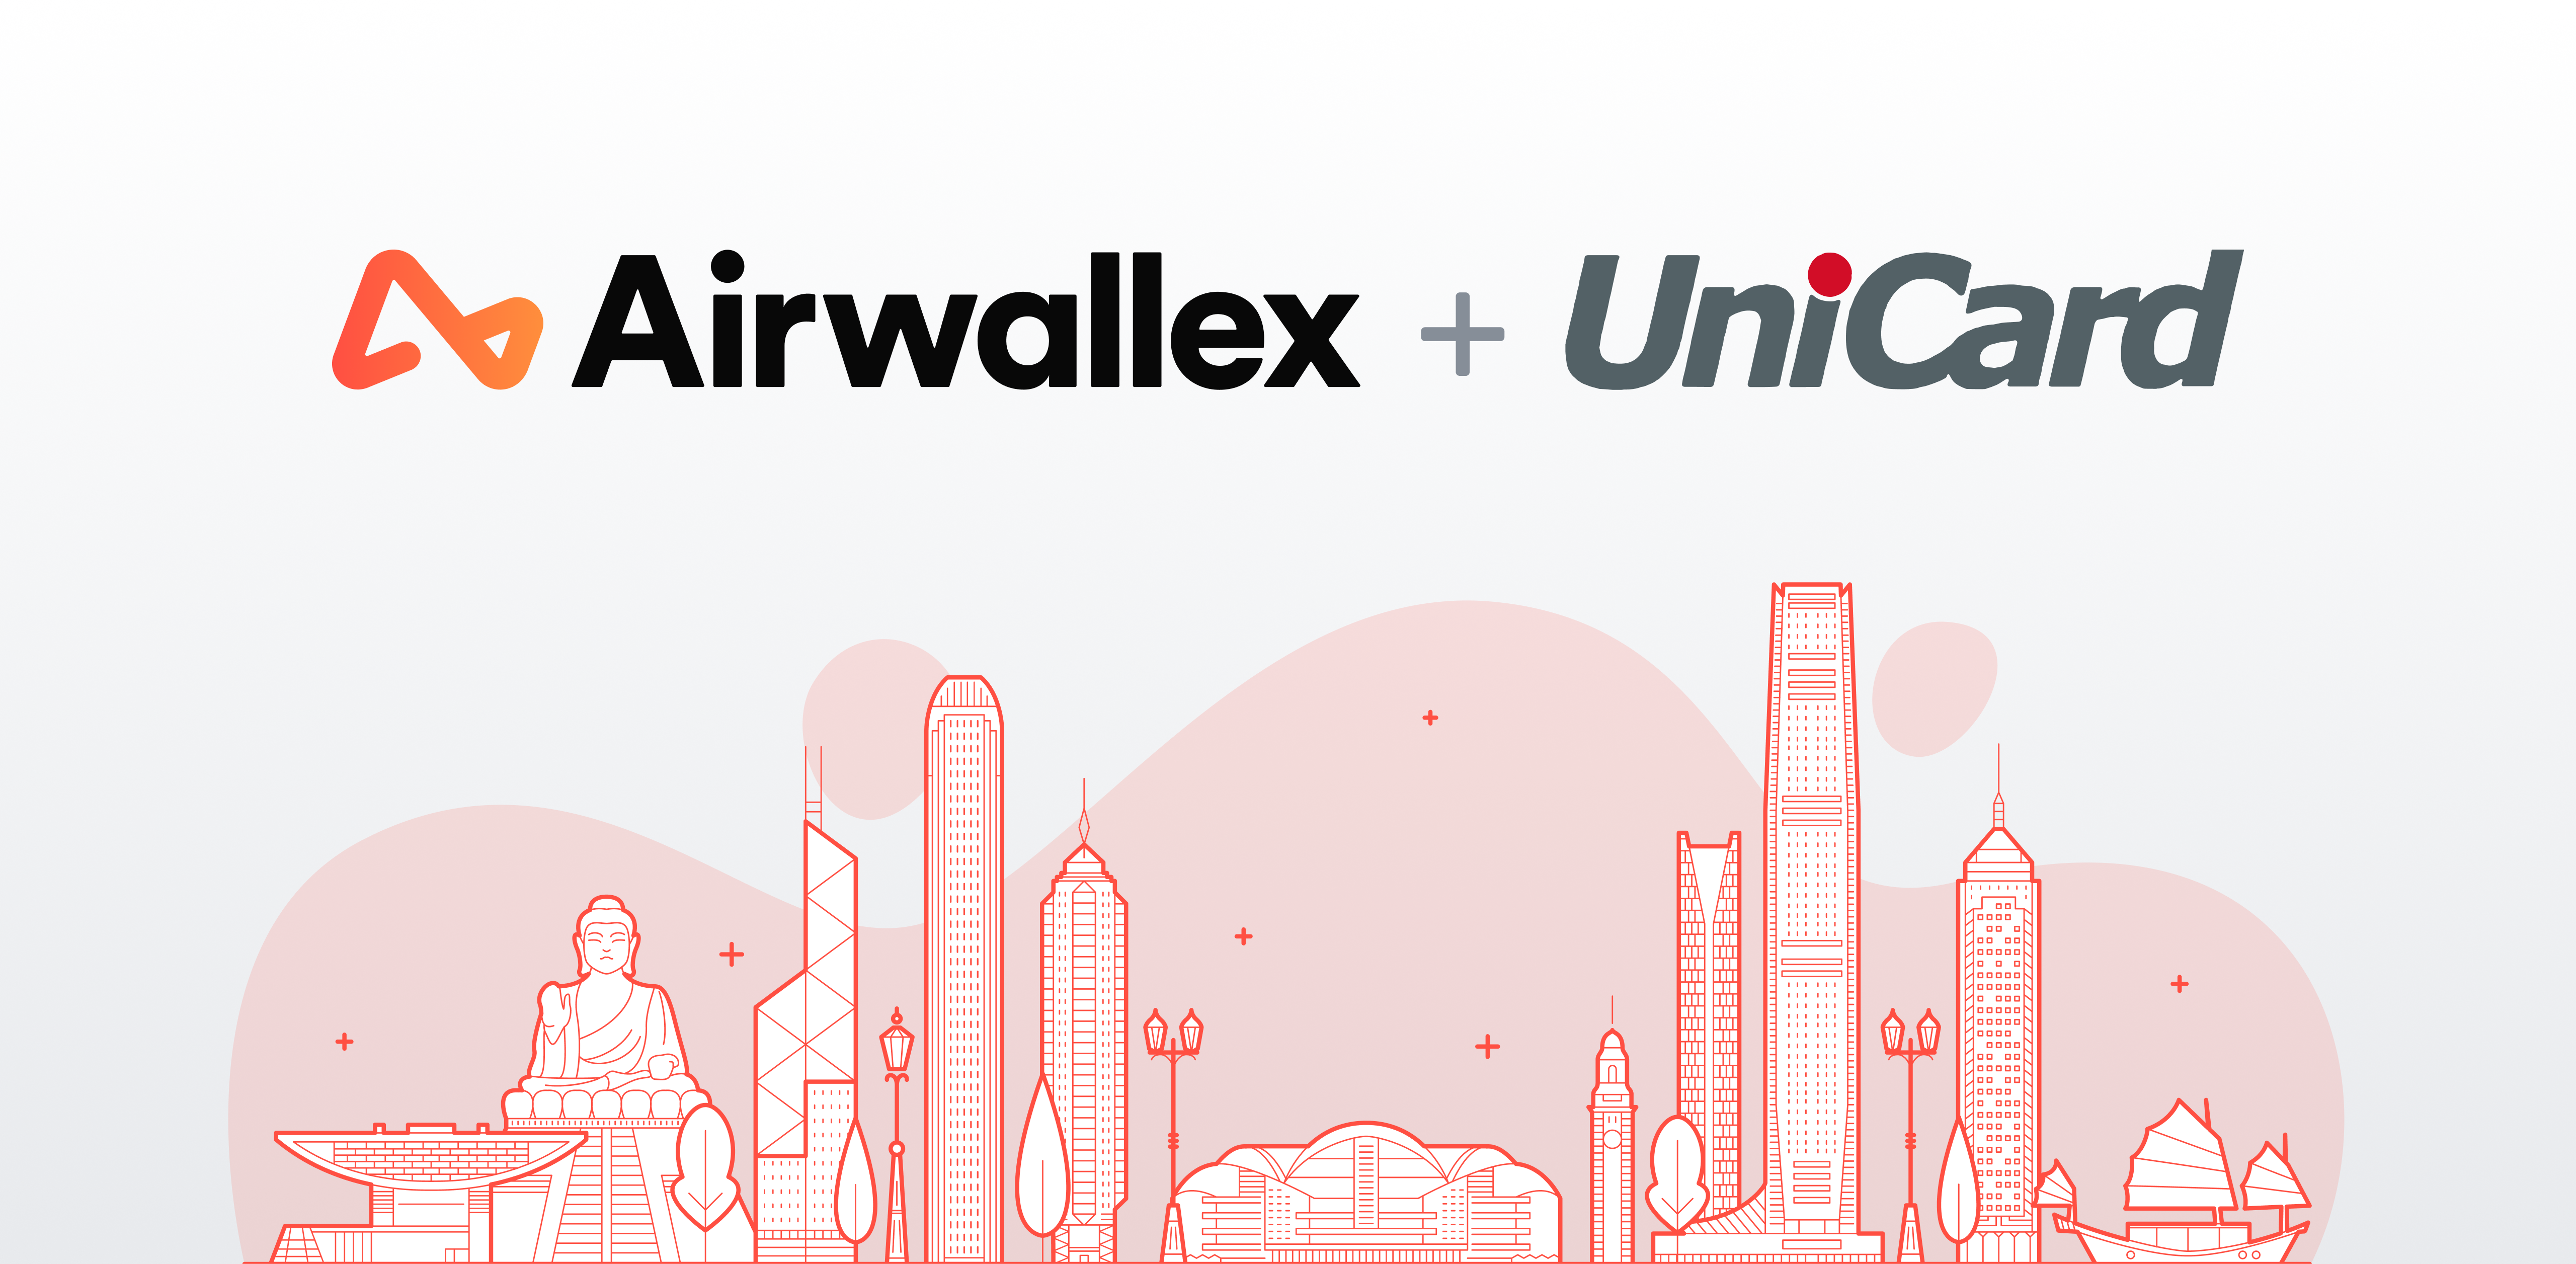 Airwallex Receives Regulatory Approval and Completes Acquisition of UniCard